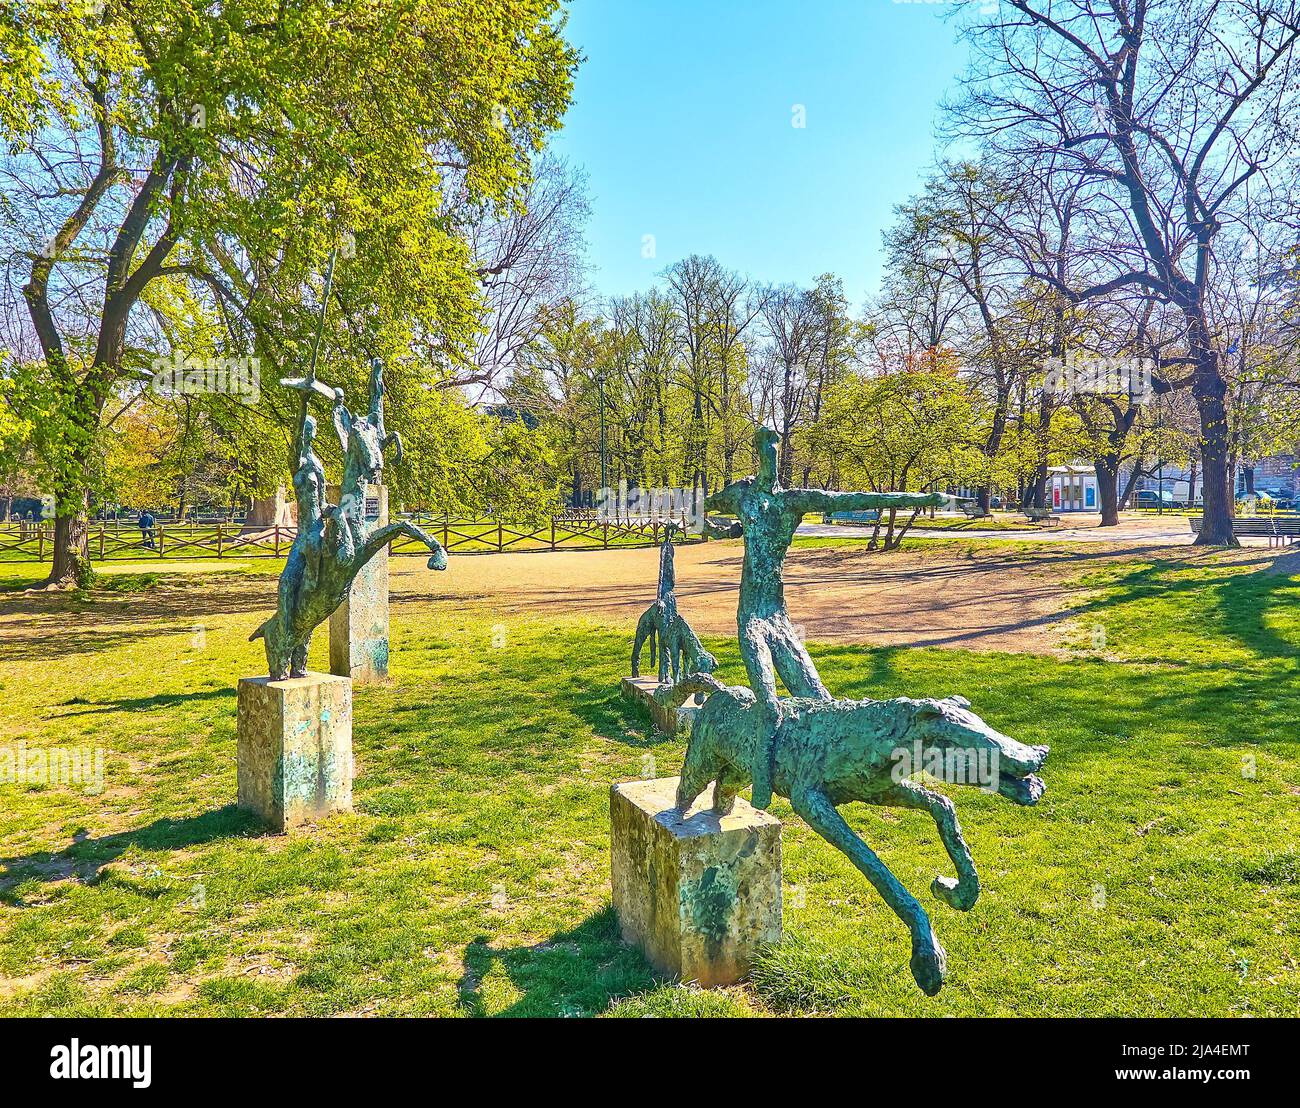 MILAN, ITALY - APRIL 5, 2022: The sculpture group of Four Horsemen of apocalypse by Harry-Pierre Rosenthal in Public Park of Indro Montanelli, on Apri Stock Photo